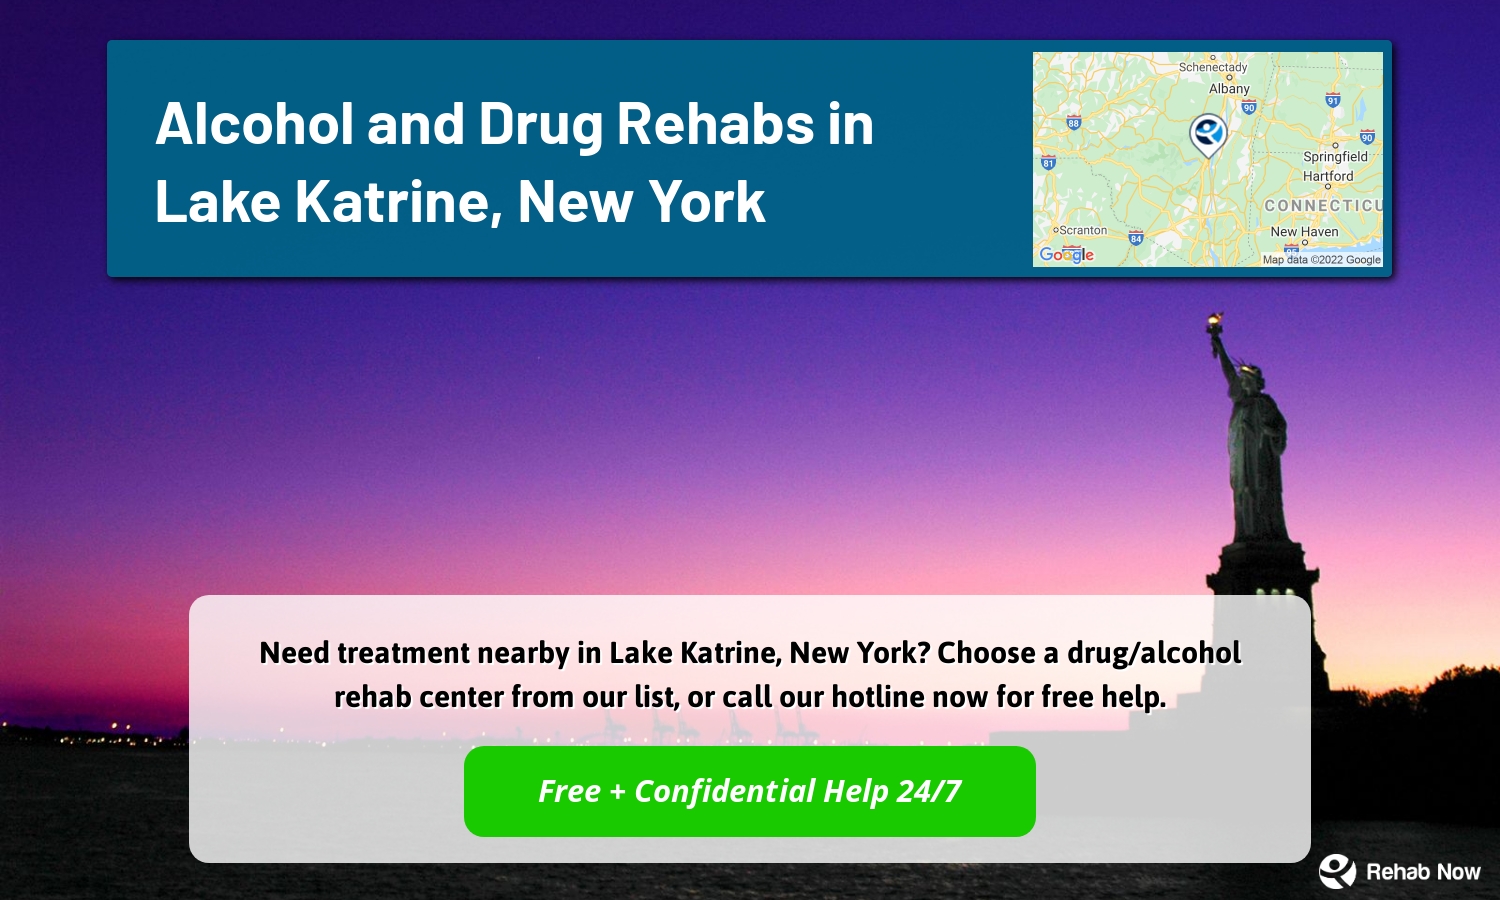 Need treatment nearby in Lake Katrine, New York? Choose a drug/alcohol rehab center from our list, or call our hotline now for free help.